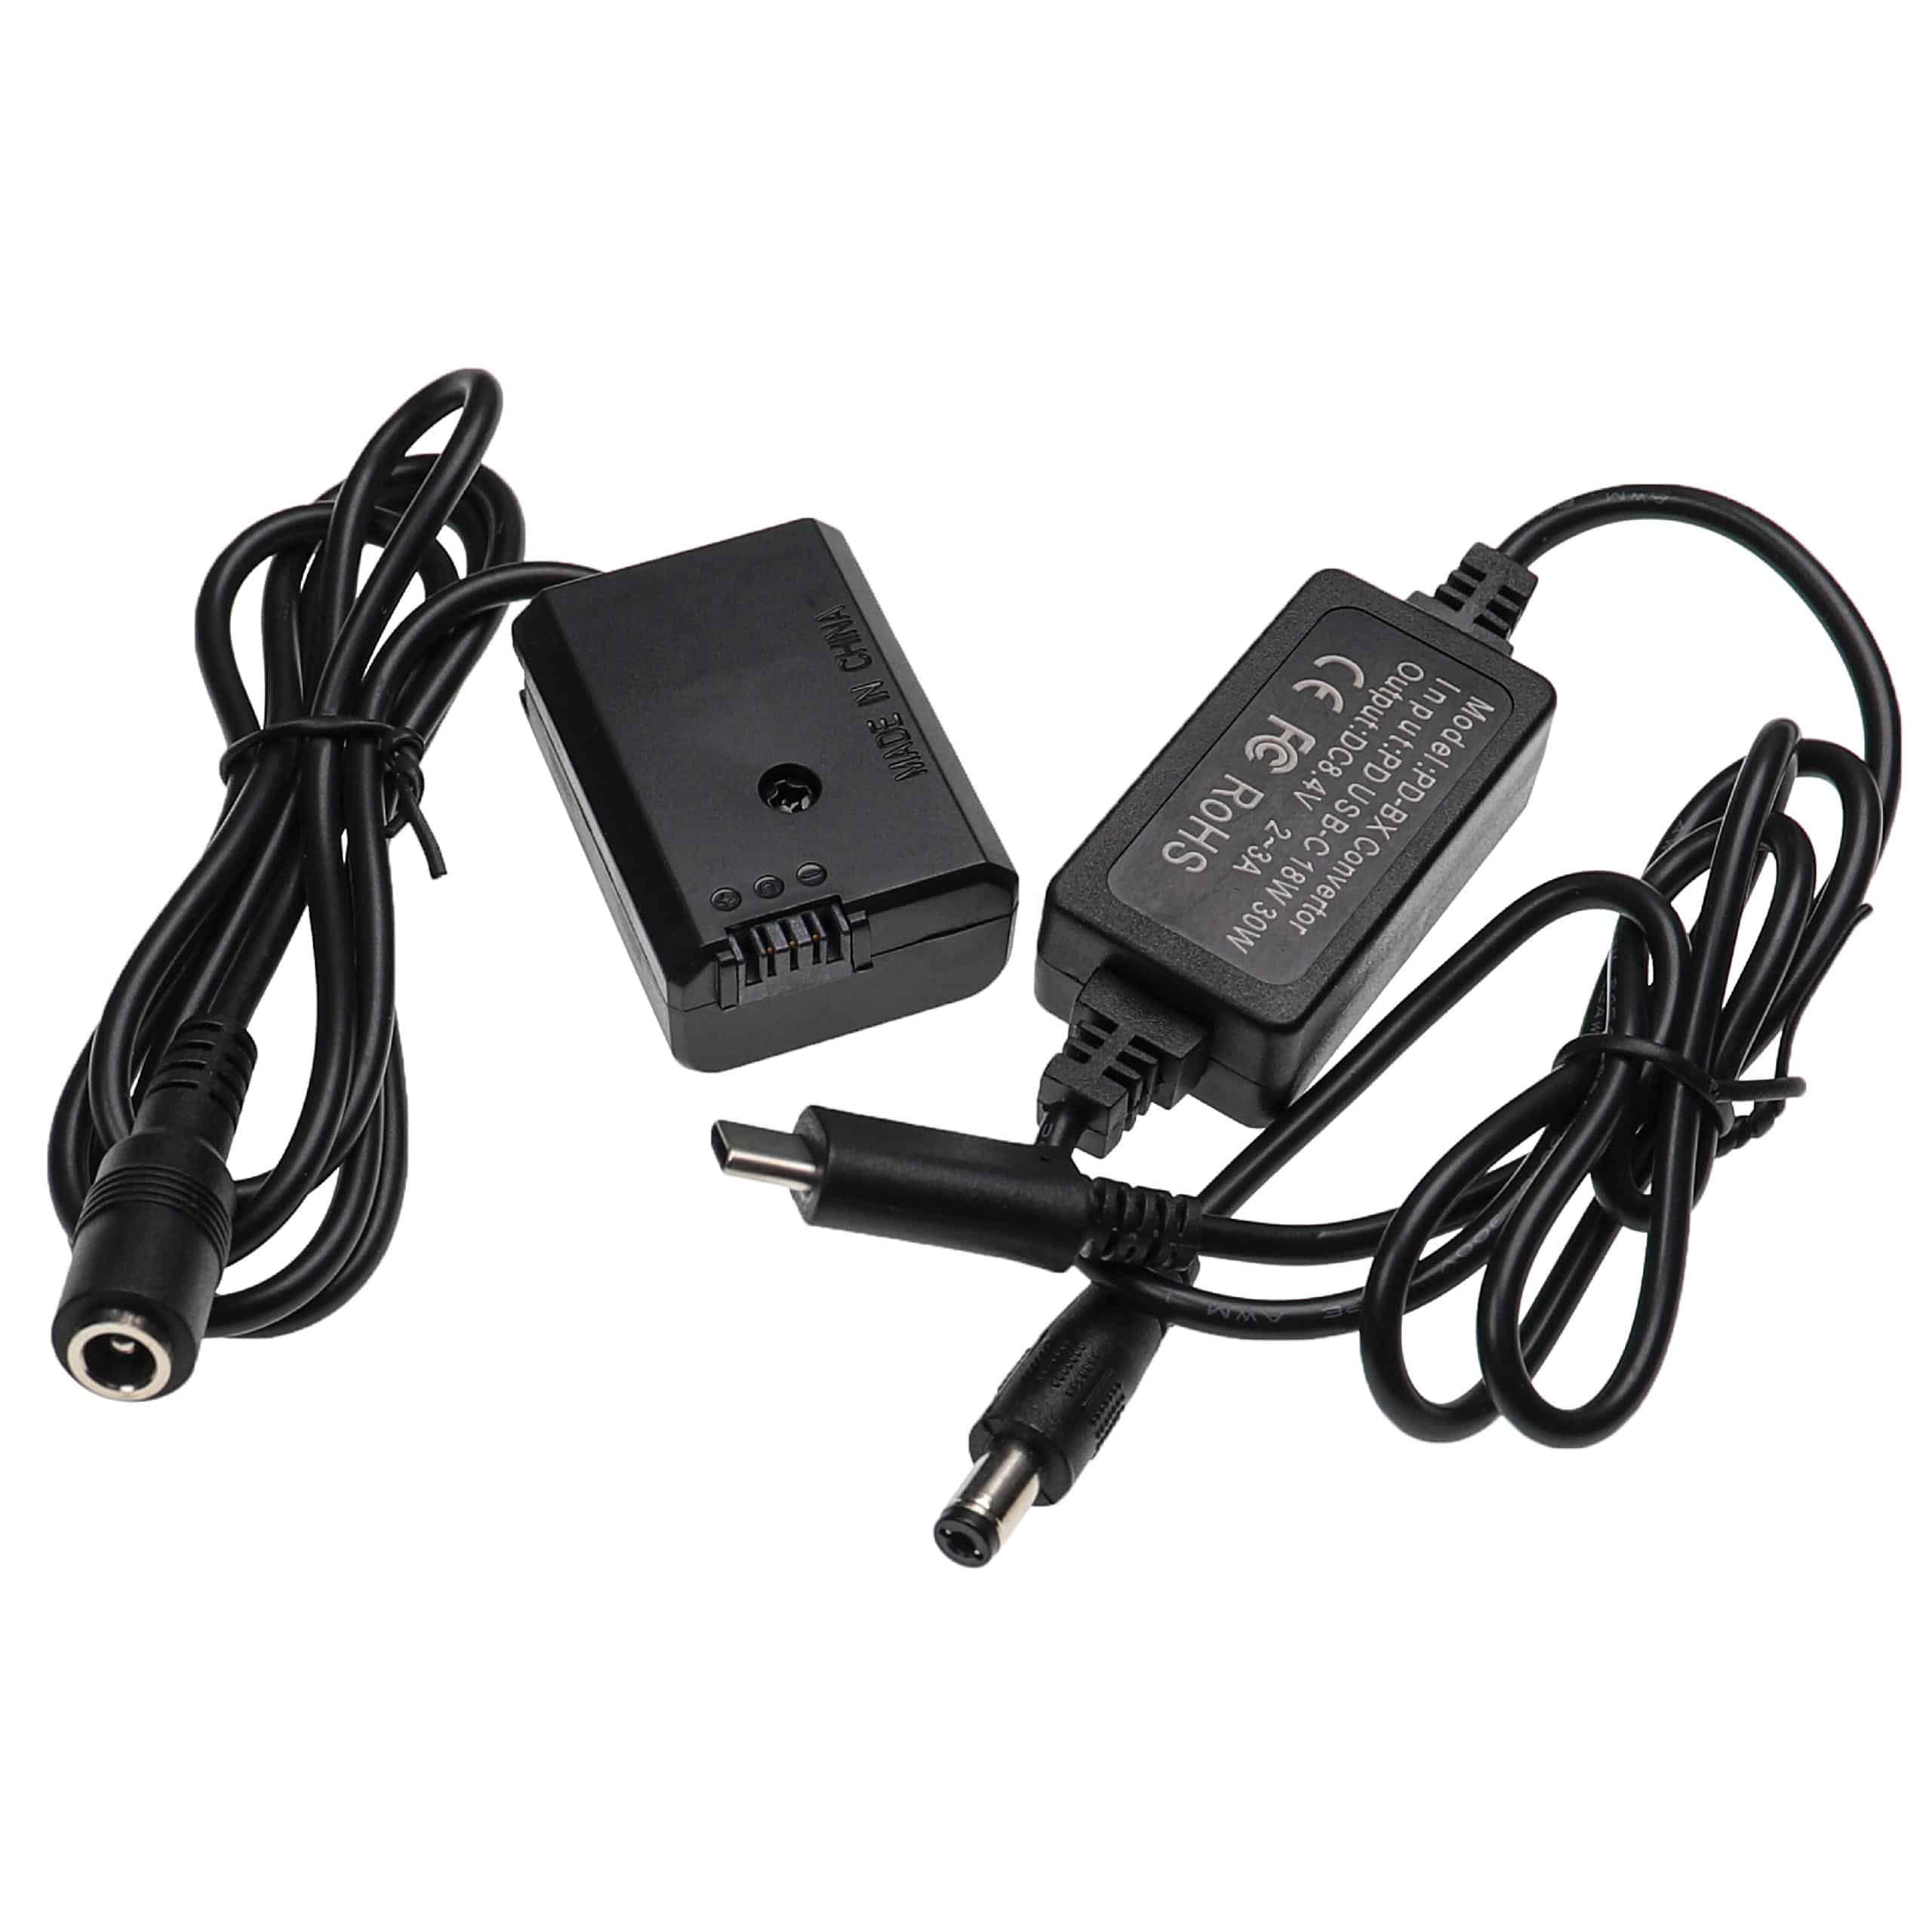 USB Power Supply replaces AC-PW20 for Camera + DC Coupler as Sony NP-FW50 - 2 m, 8.4 V 3.0 A